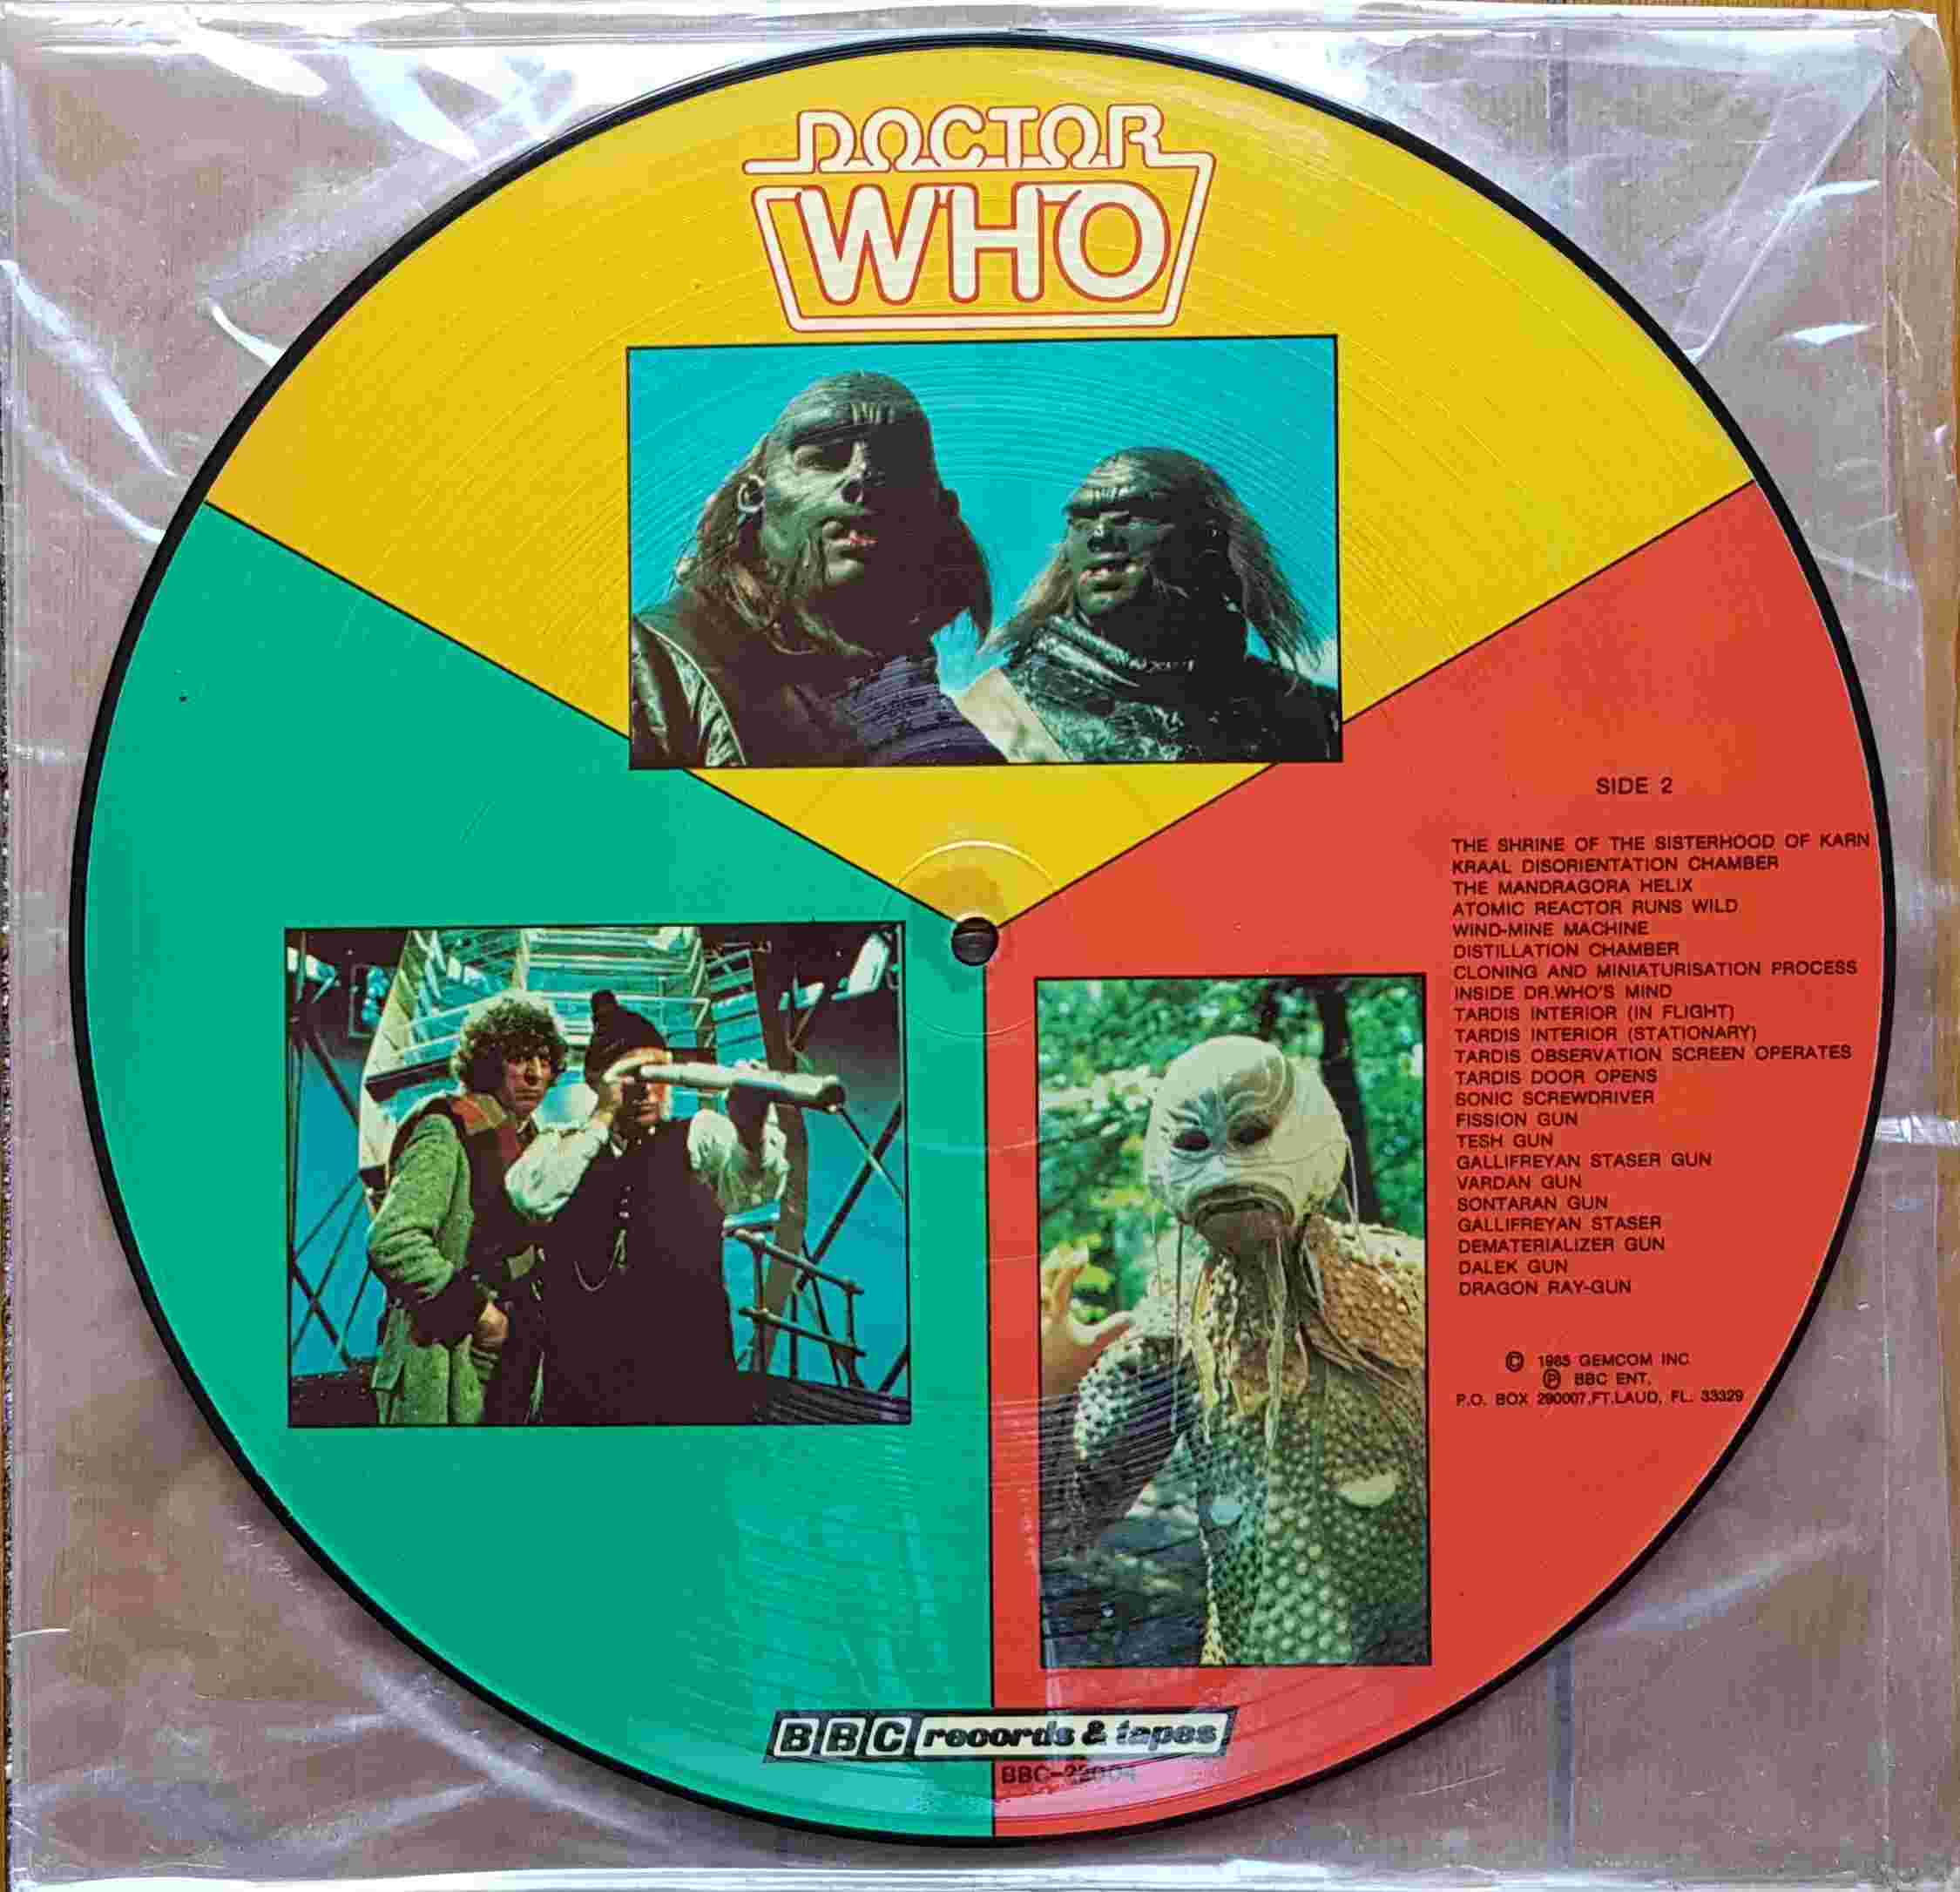 Picture of BBC - 22004 Doctor Who the music by artist Various from the BBC records and Tapes library